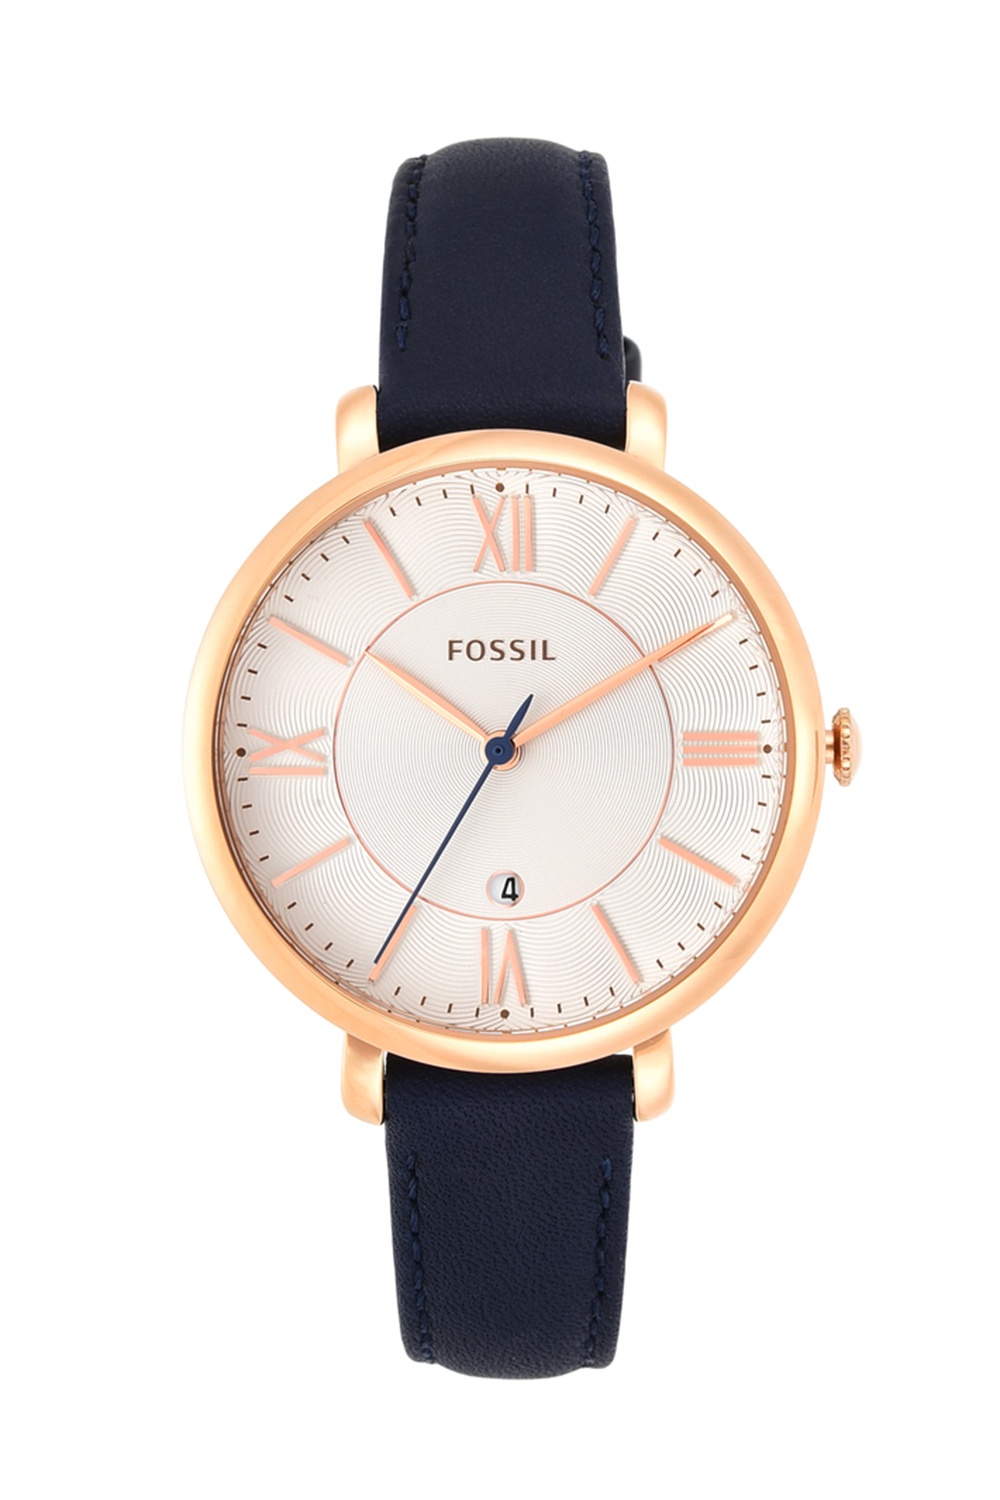 Fossil Jacqueline Navy Leather Watch | Odel.lk